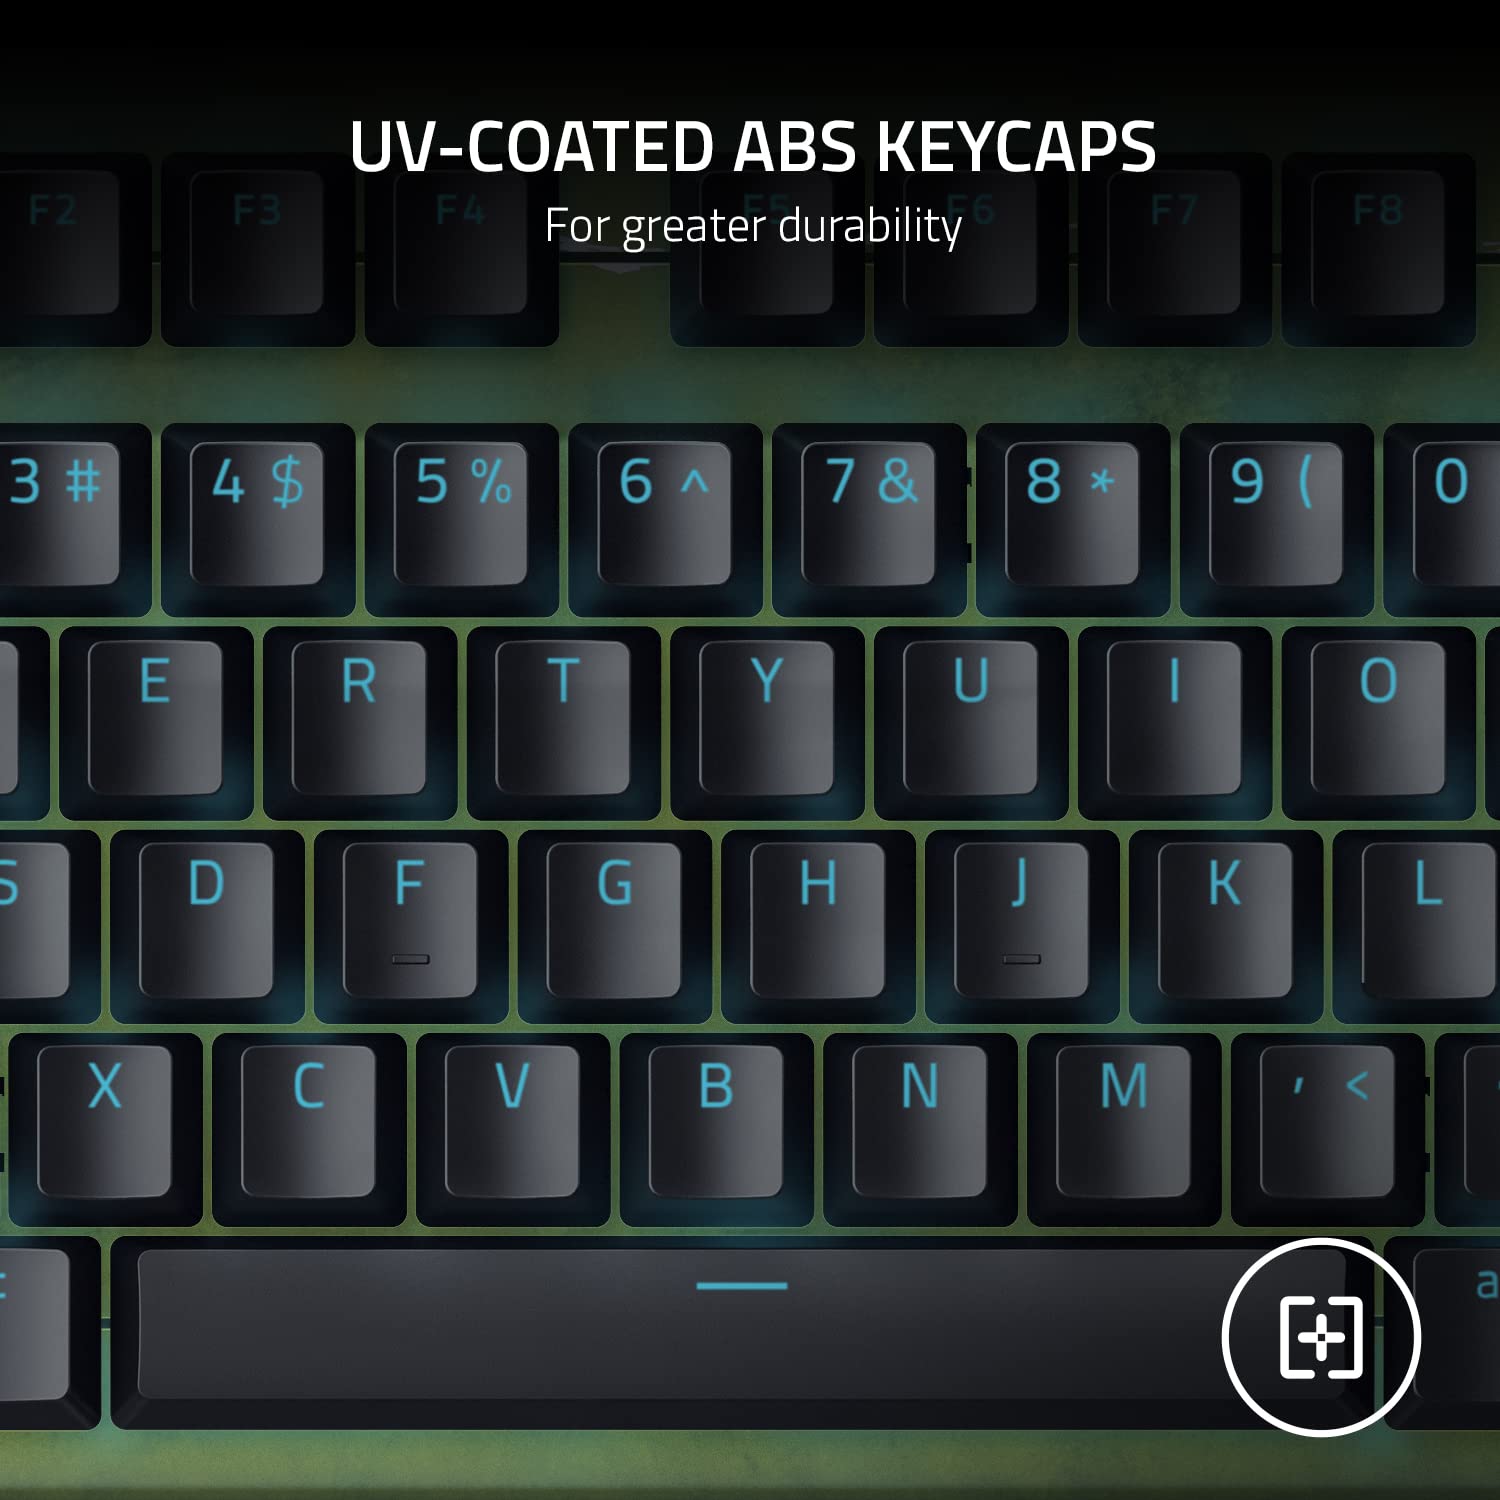 Razer BlackWidow V3 Mechanical Gaming Keyboard: Green Mechanical Switches - Tactile & Clicky - Chroma RGB Lighting - Compact Form Factor - Programmable Macros - Halo Infinite